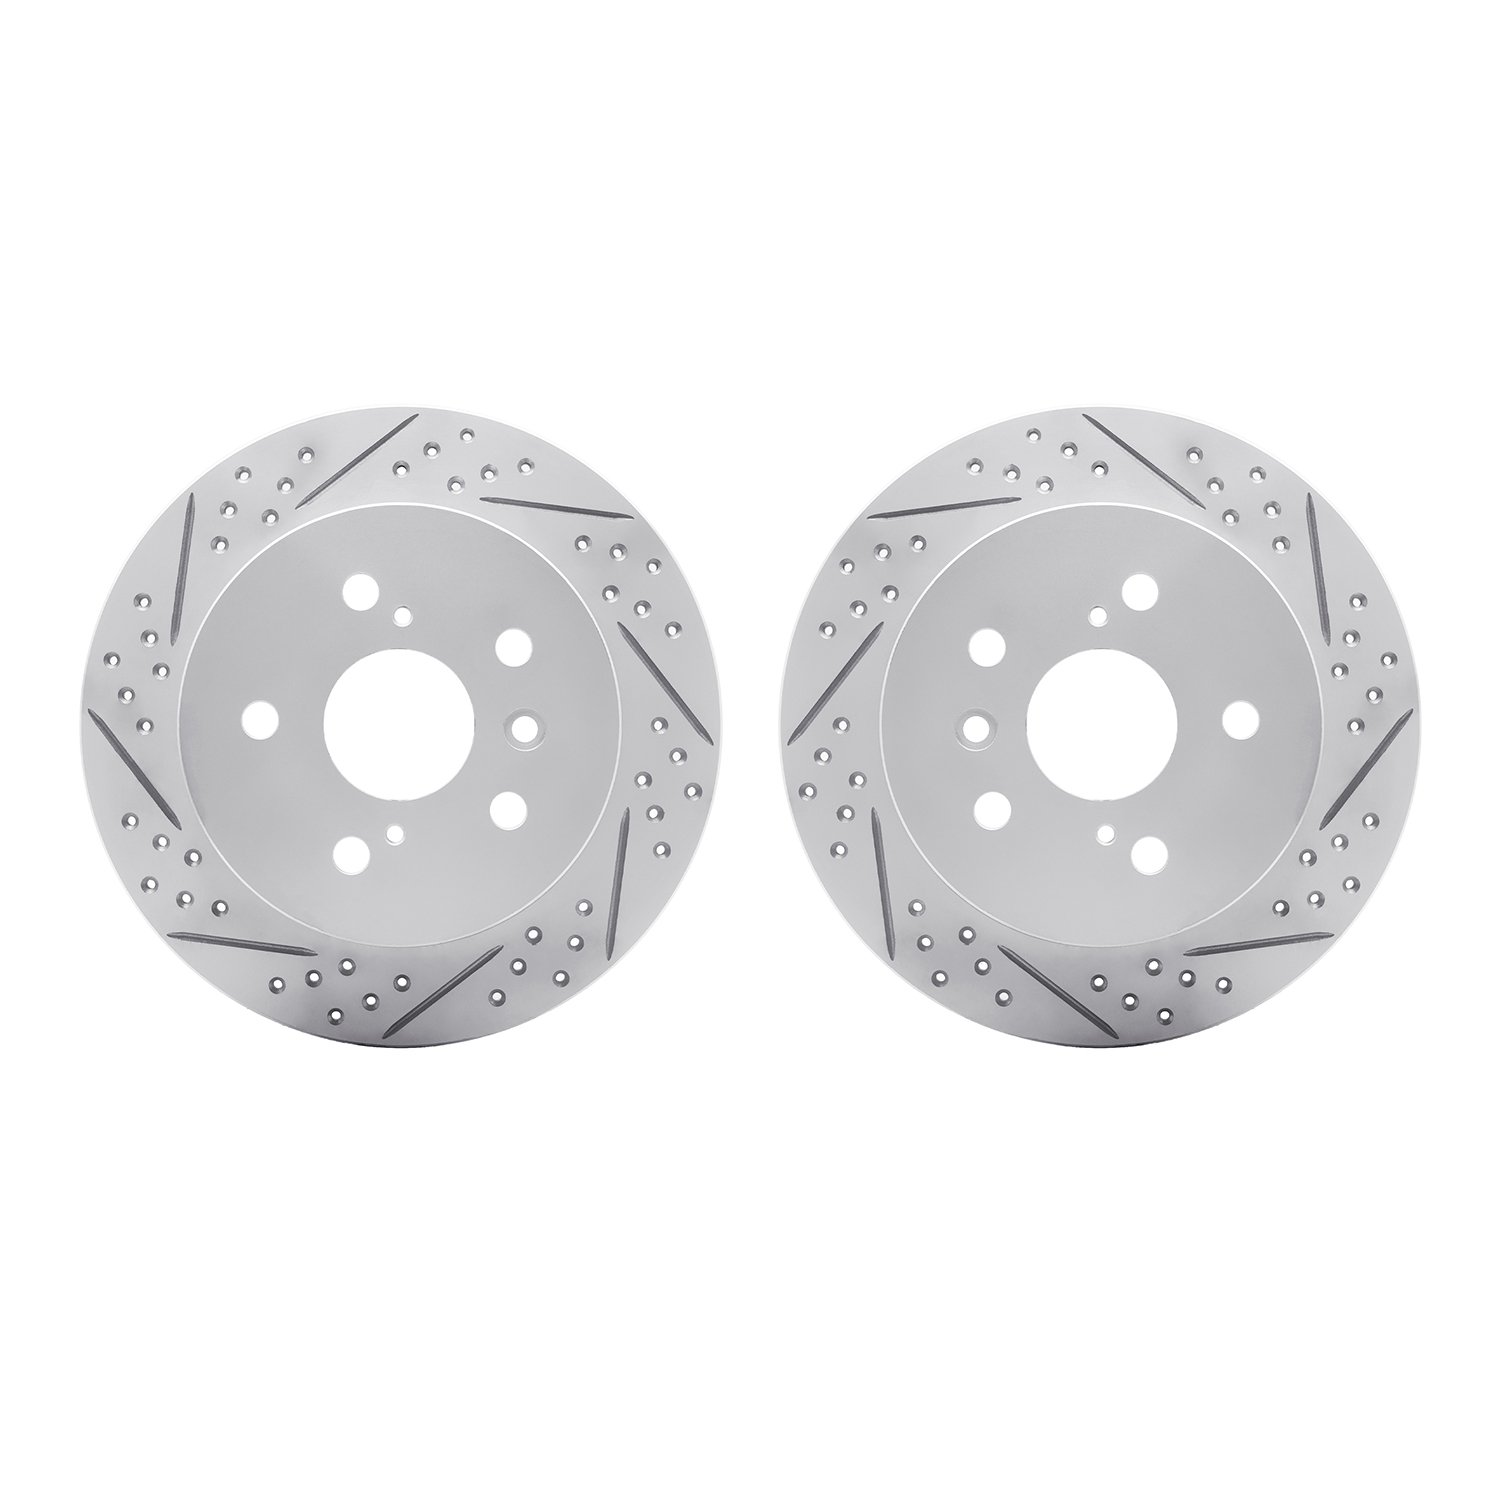 2002-76043 Geoperformance Drilled/Slotted Brake Rotors, 2012-2018 Lexus/Toyota/Scion, Position: Rear